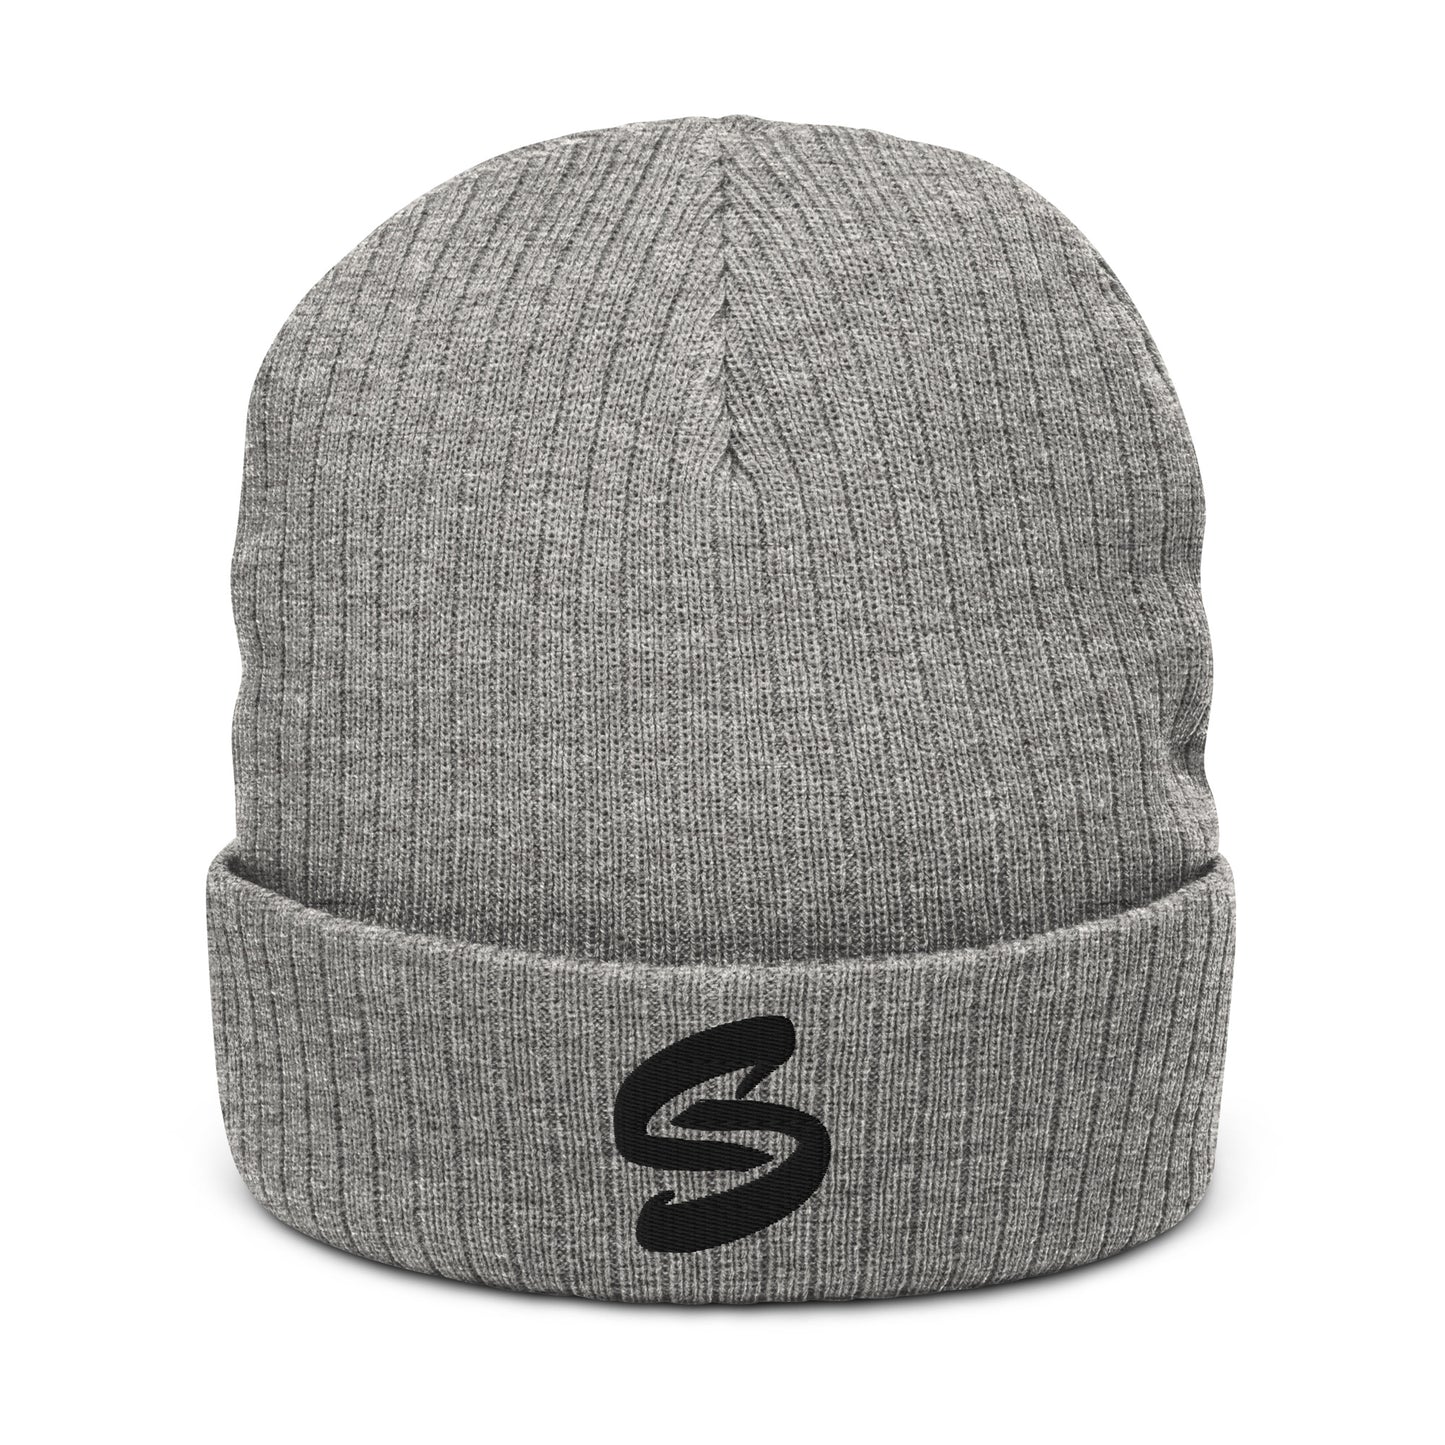 Ribbed knit beanie in recycled polyester and acrylic blend, double-layered with a cuffed design. Stylish, warm, and versatile accessory for all head sizes. Handcrafted on demand to reduce overproduction and promote sustainable choices. 8.27 inches (21 cm) in length. Beanie in Grey with embroidered Black Send Coalition S logo